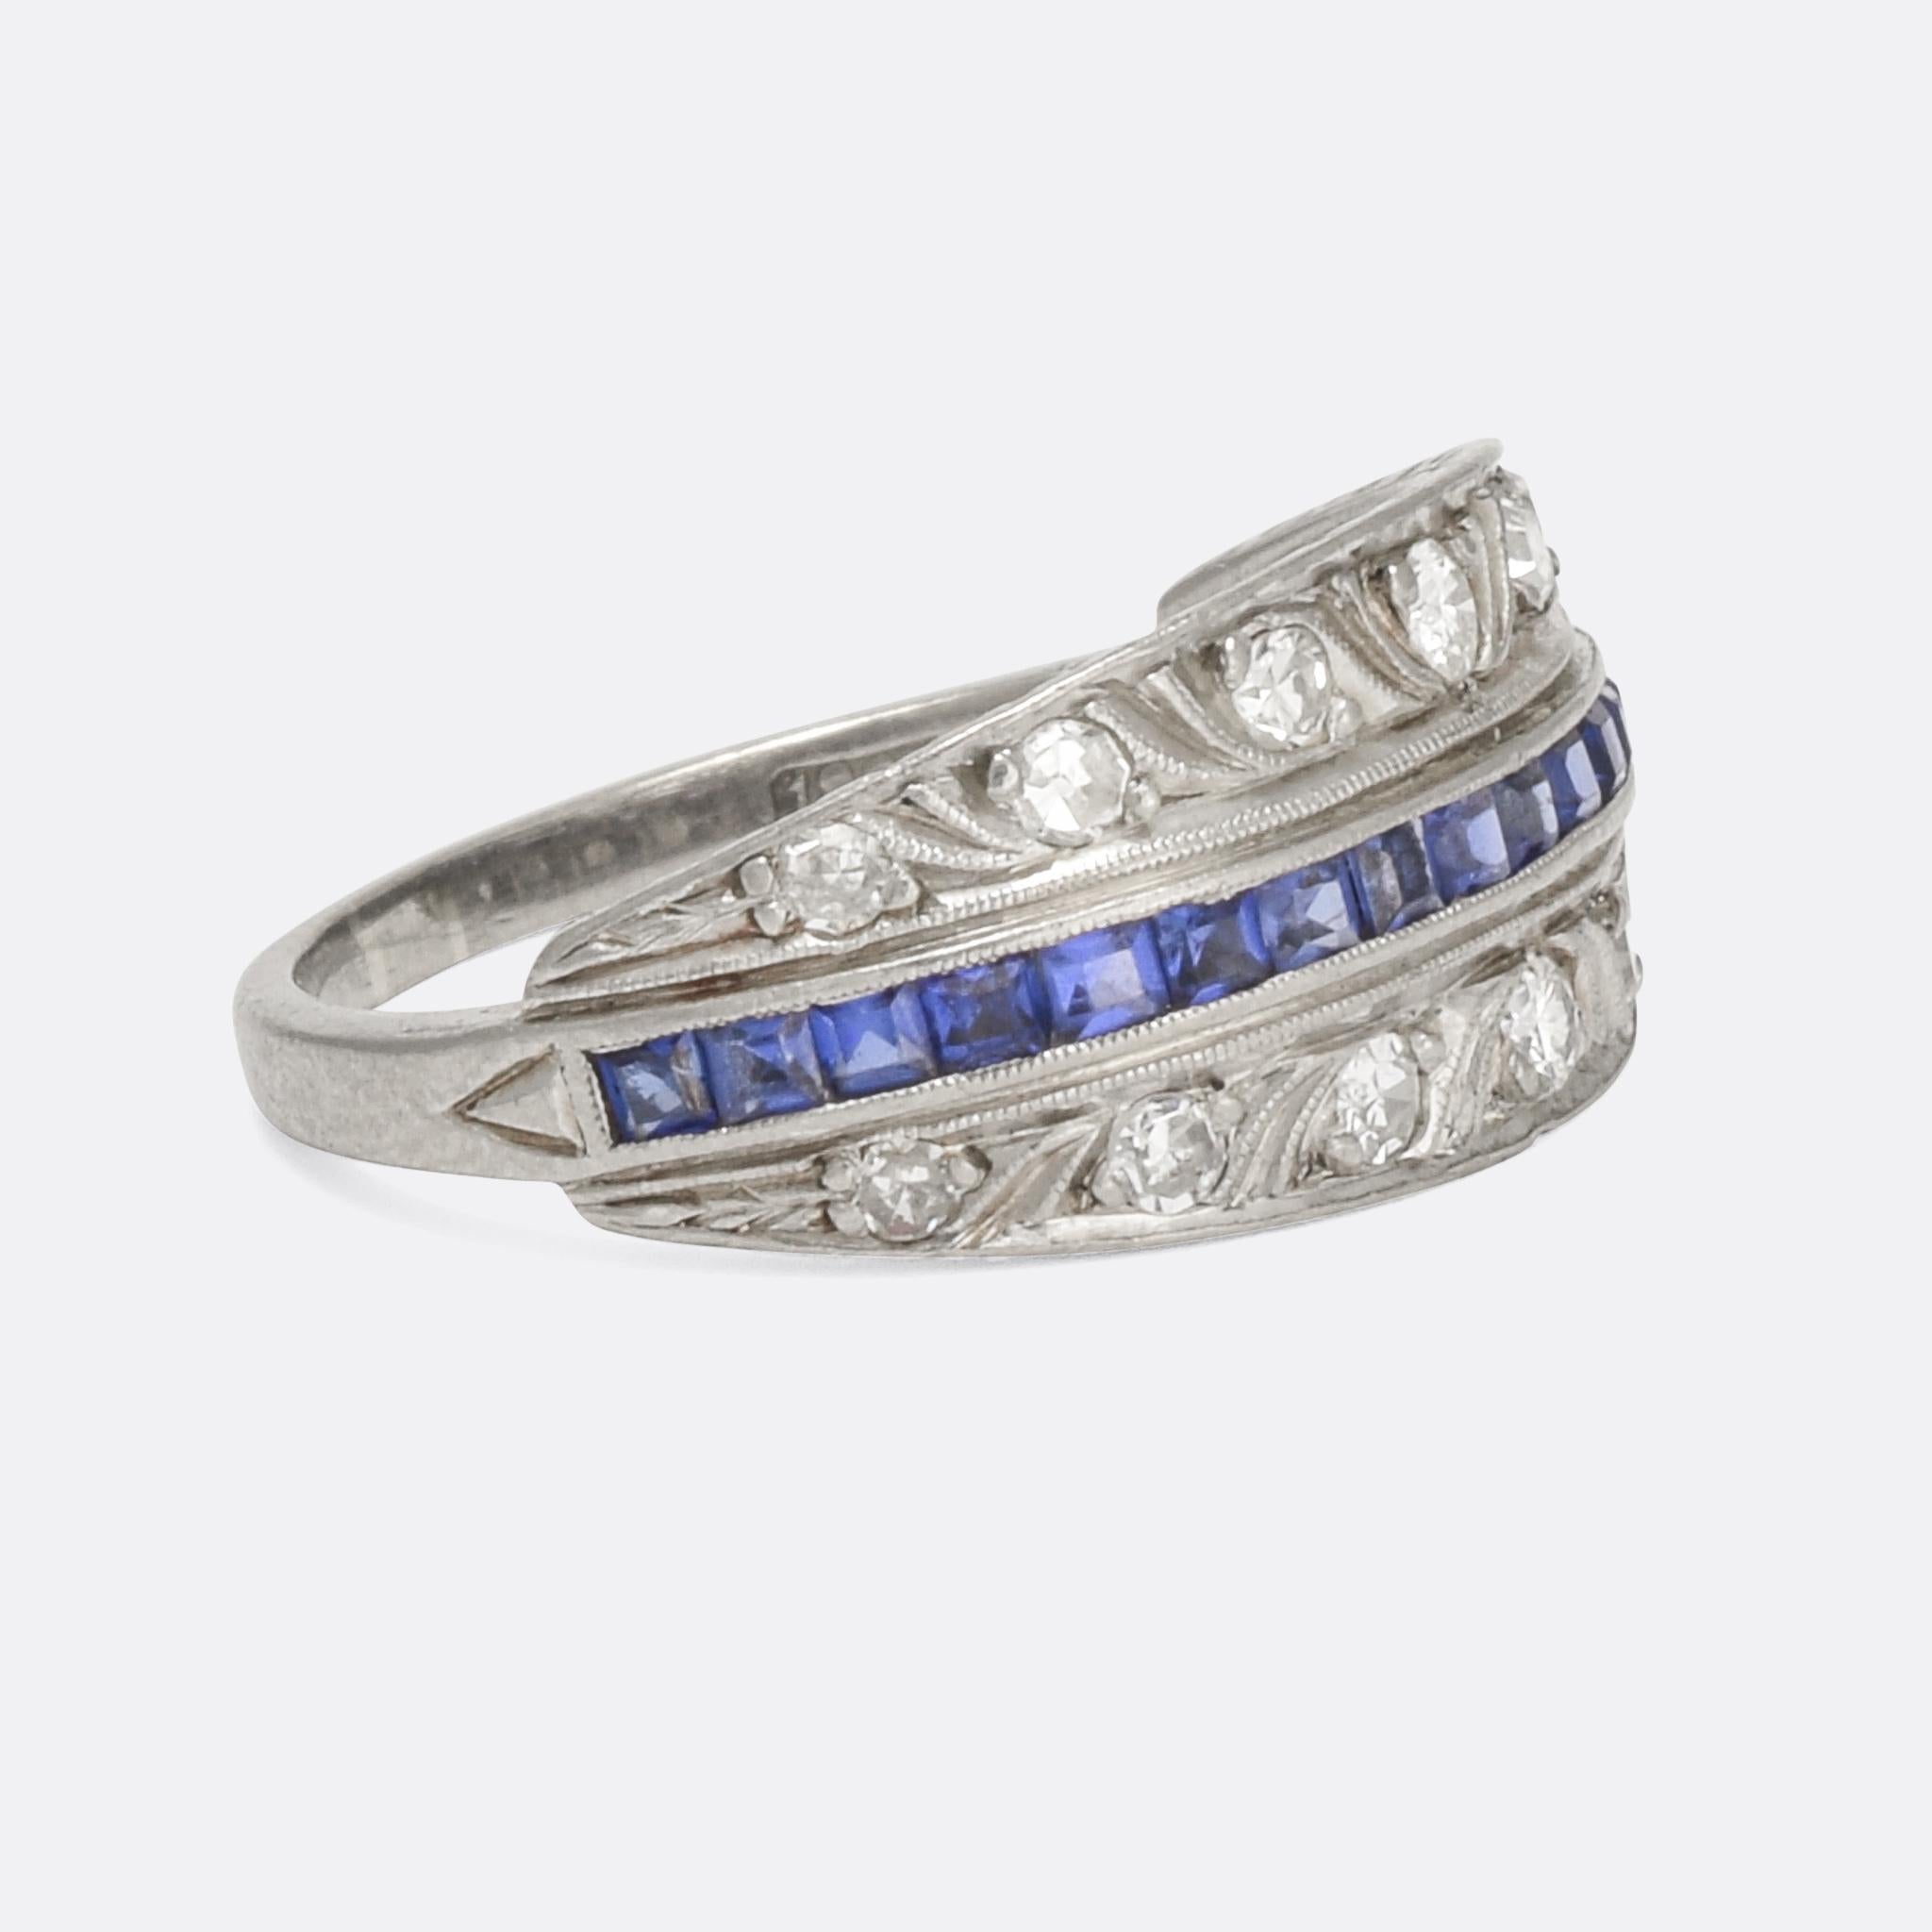 A stylish Art Deco cluster ring, set with a central seam of blue sapphires with seven graduated diamonds to either side. There are interesting details punctuating the whole head, with millegrain lines and curves, and triangle accents to the